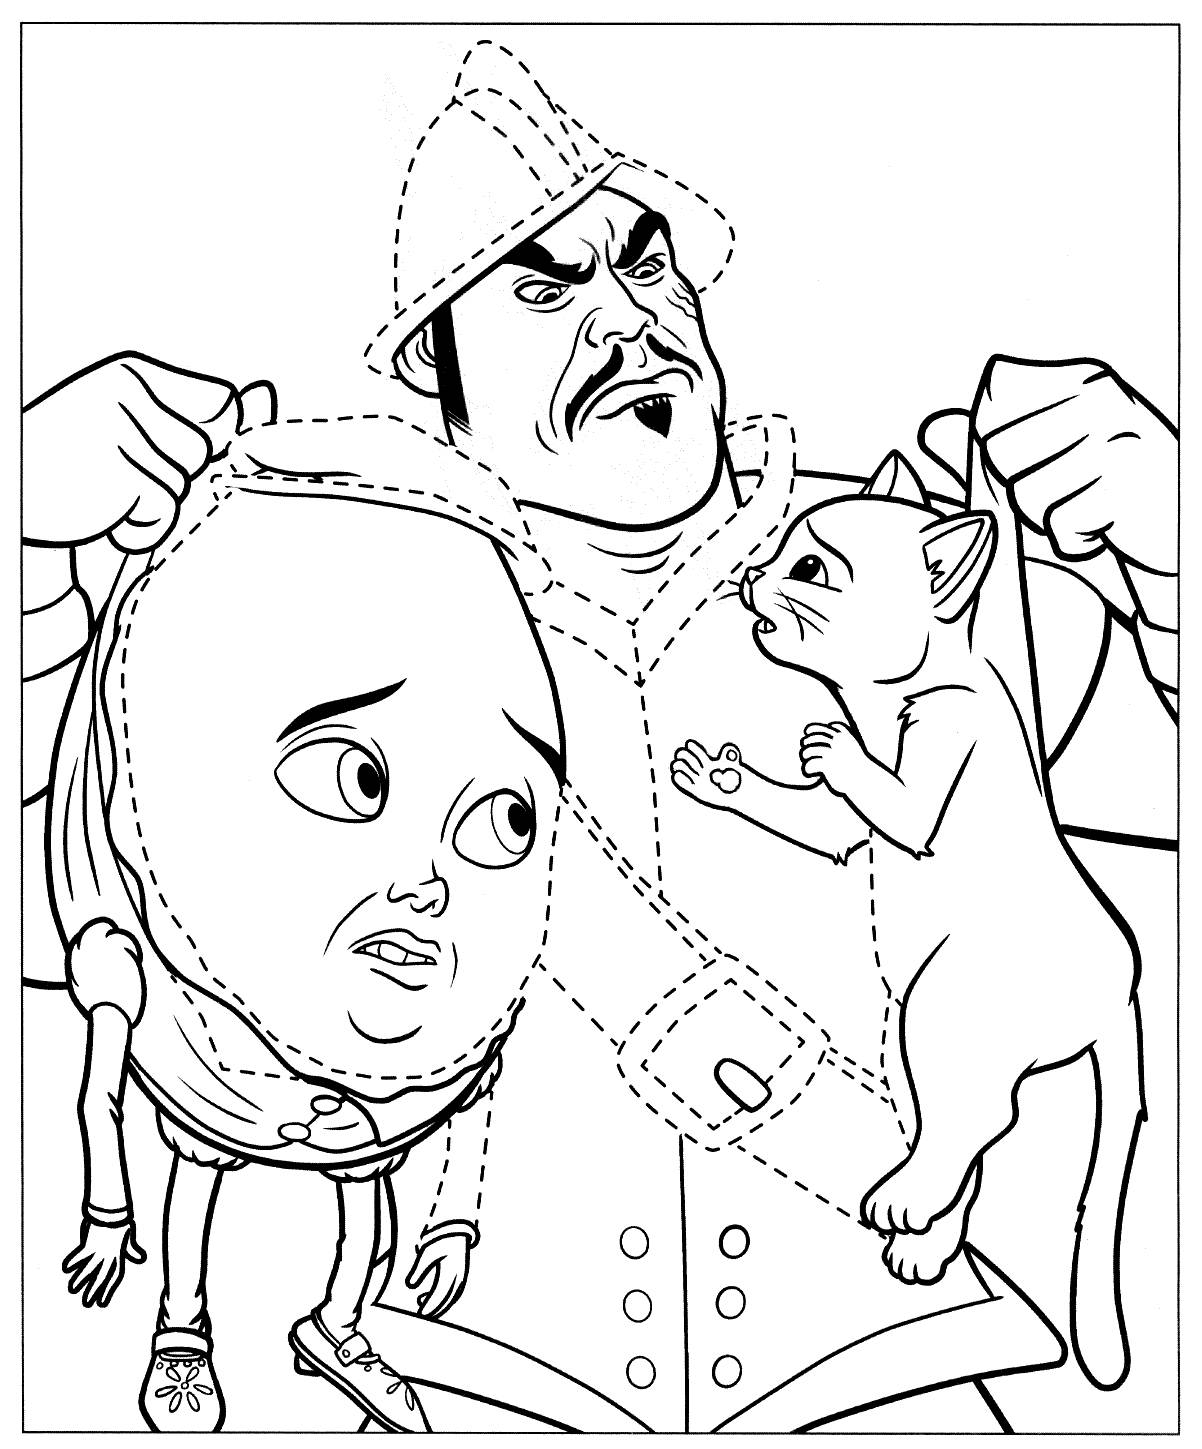 Humpty Chatter coloring pages